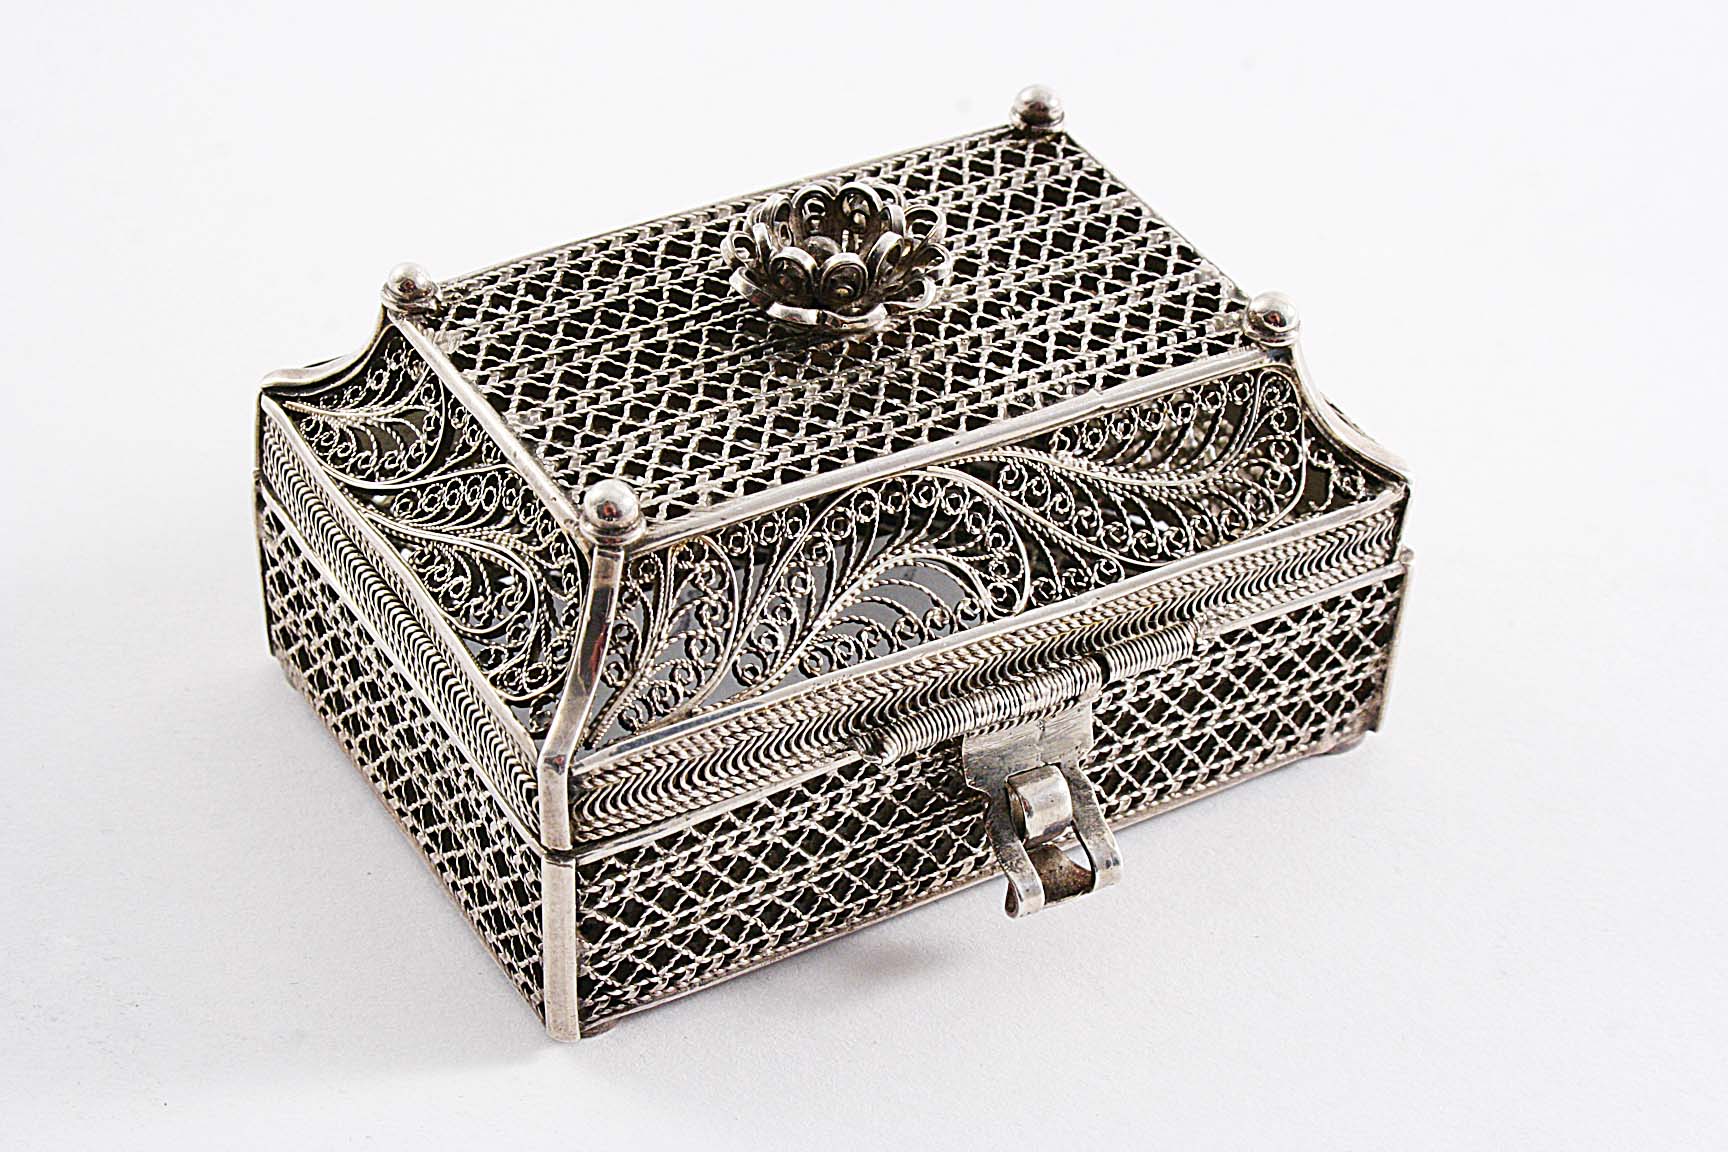 A 19TH CENTURY RUSSIAN SMALL FILIGREE CASKET with a flower finial & a hasp & staple closure,